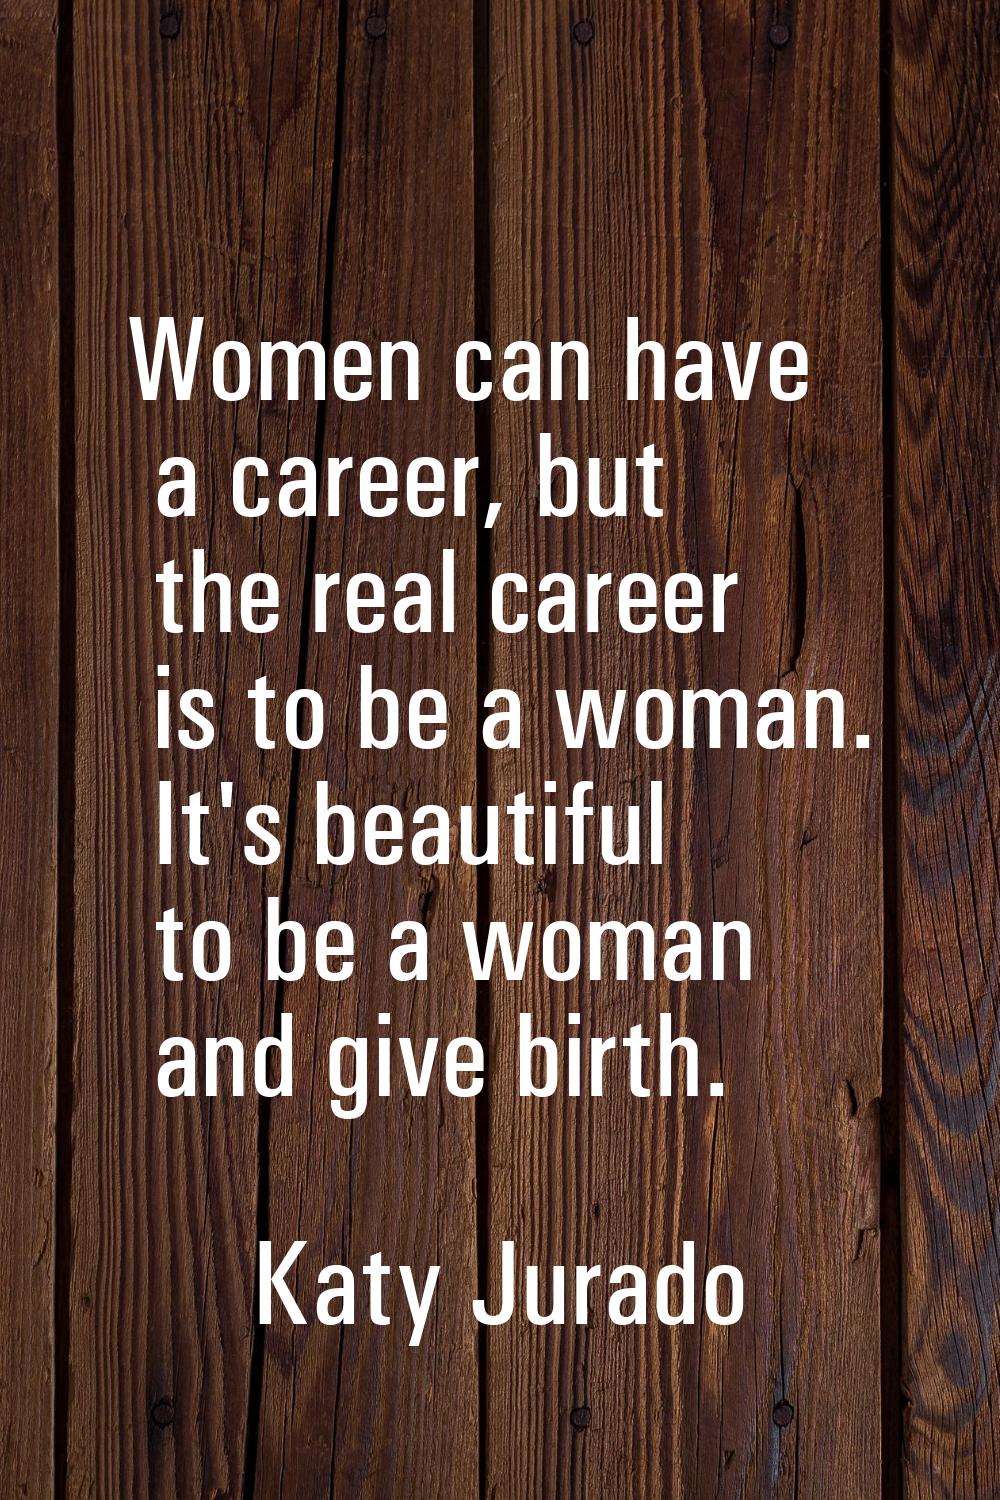 Women can have a career, but the real career is to be a woman. It's beautiful to be a woman and giv